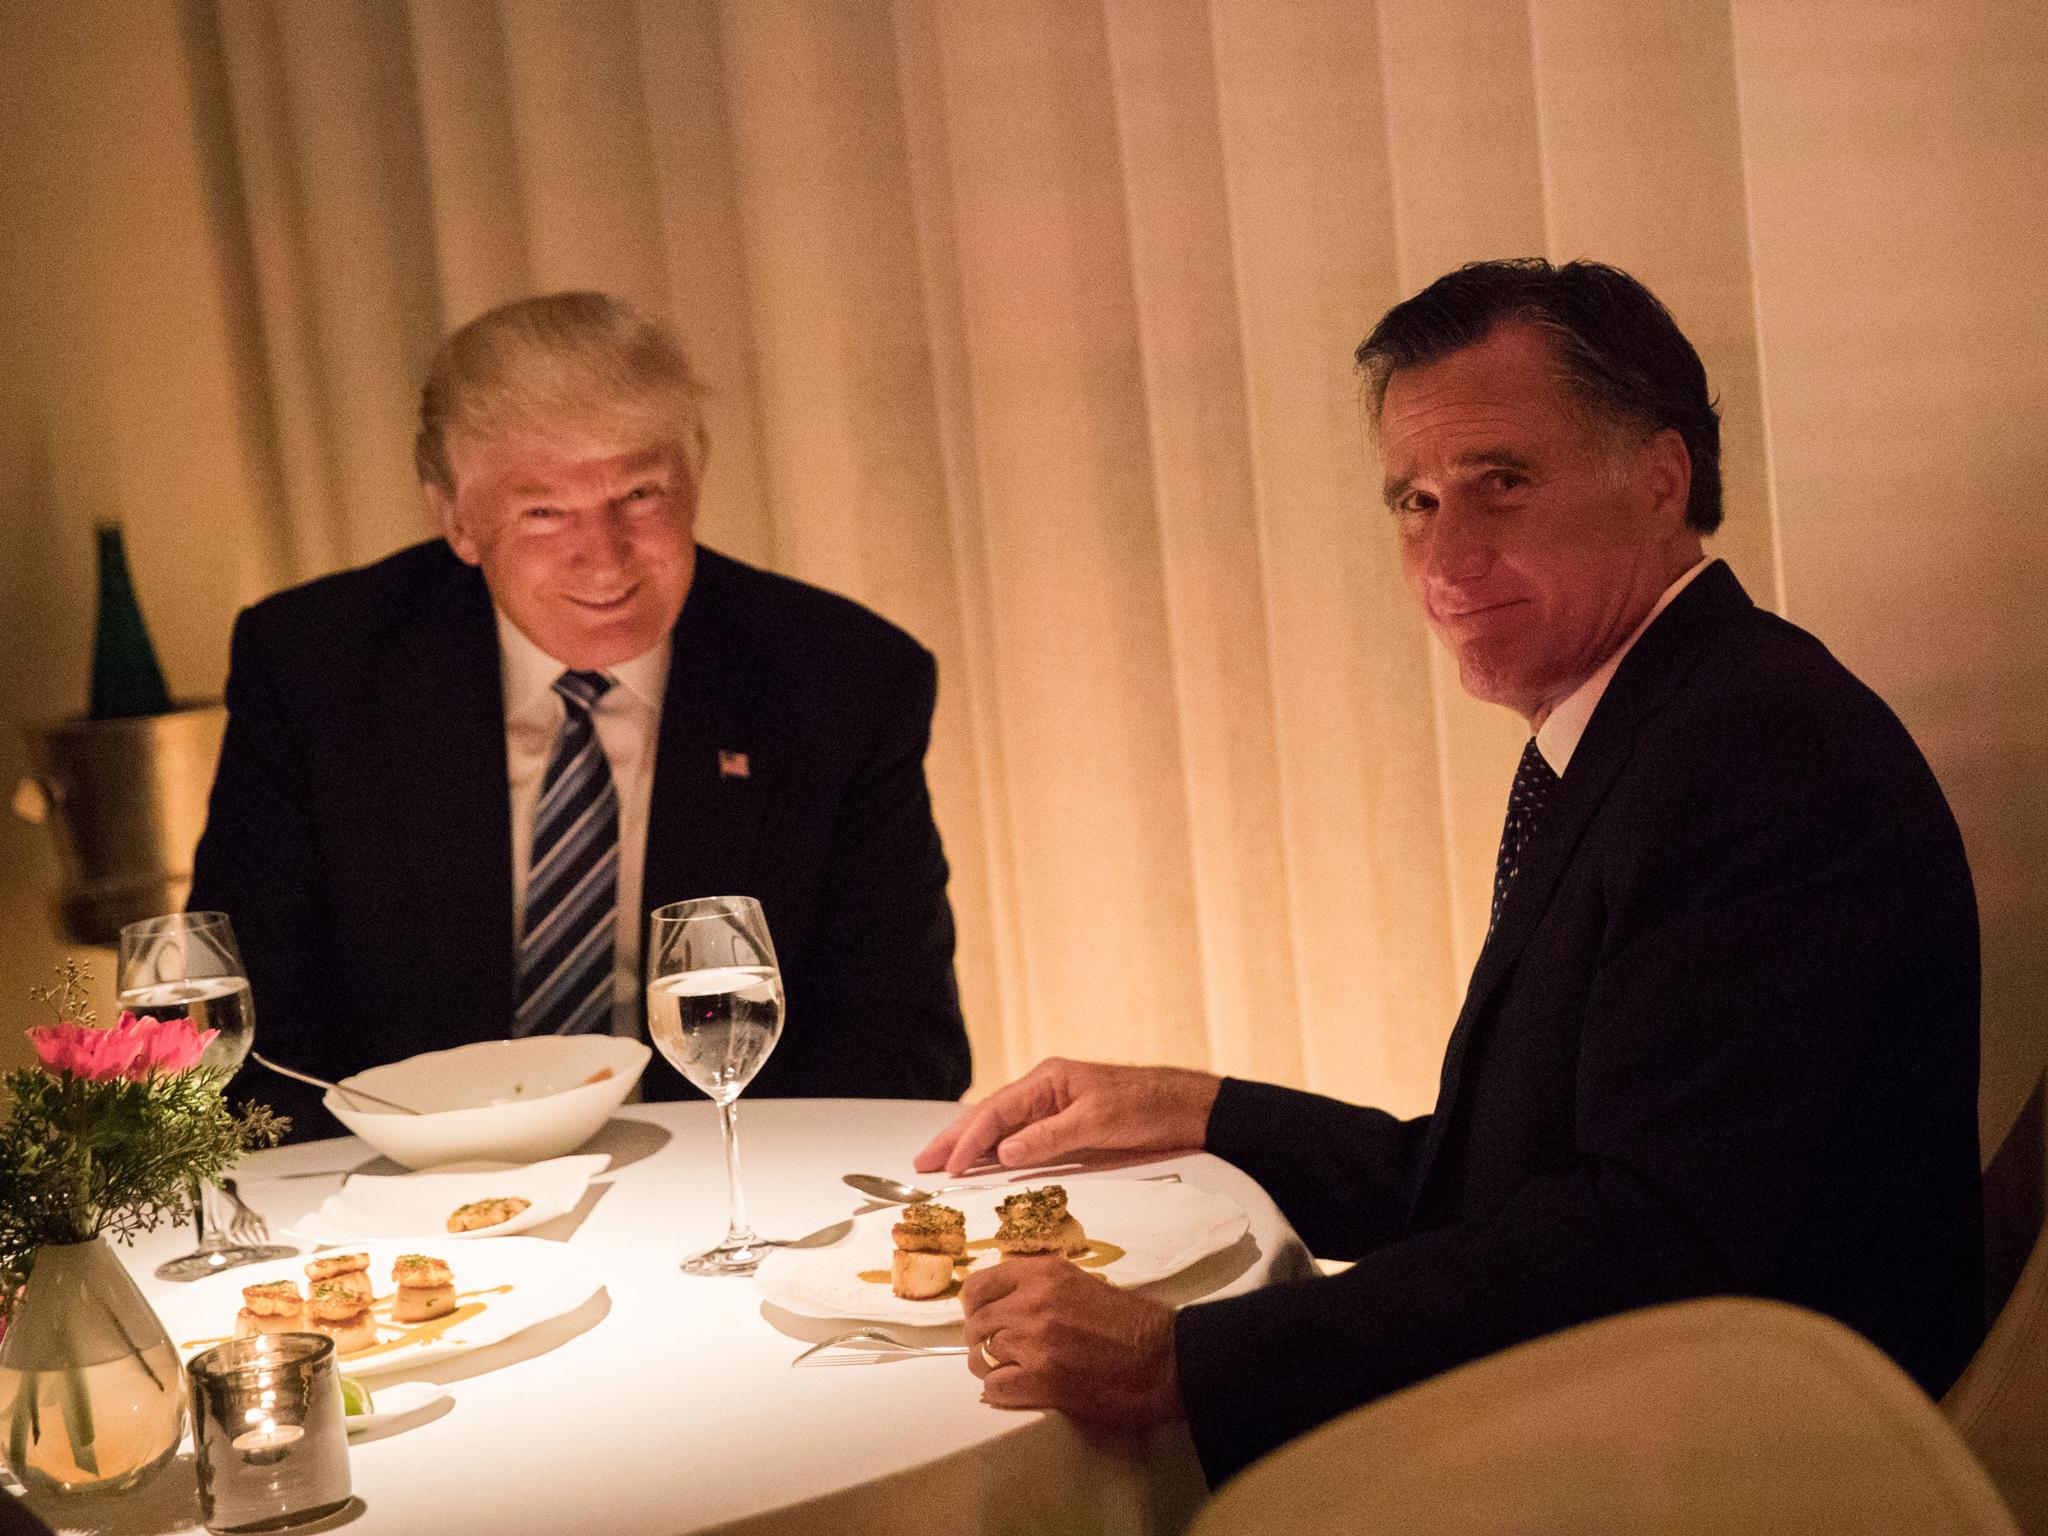 Mr Trump’s wide smile at the dinner table may have taken on a whole new meaning